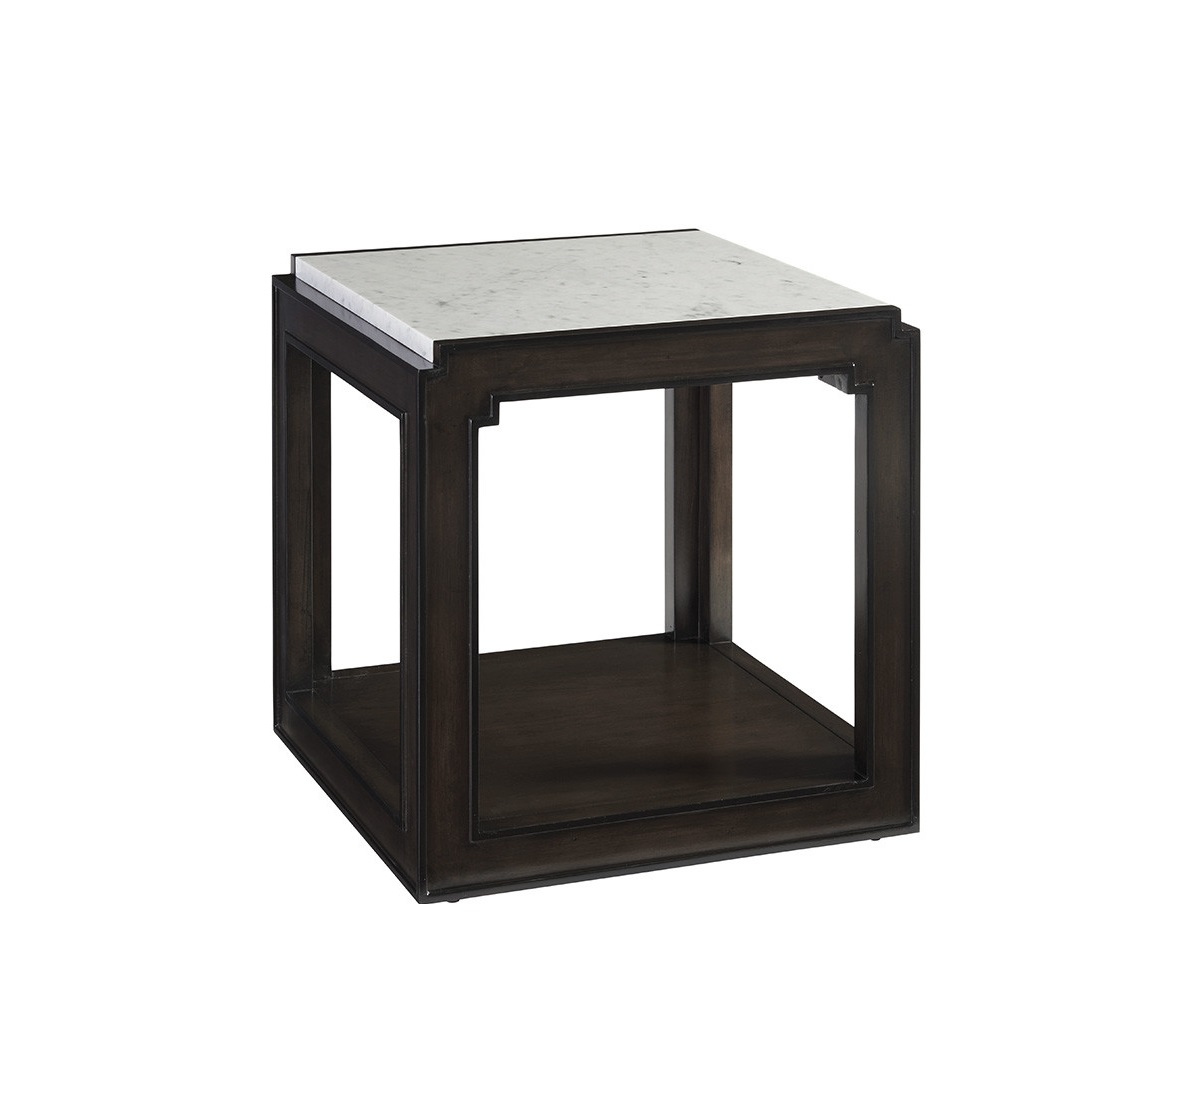 Doheny Lamp Table, Lexington End Tables For Sale Cheap Brooklyn, New York, Furniture By ABD